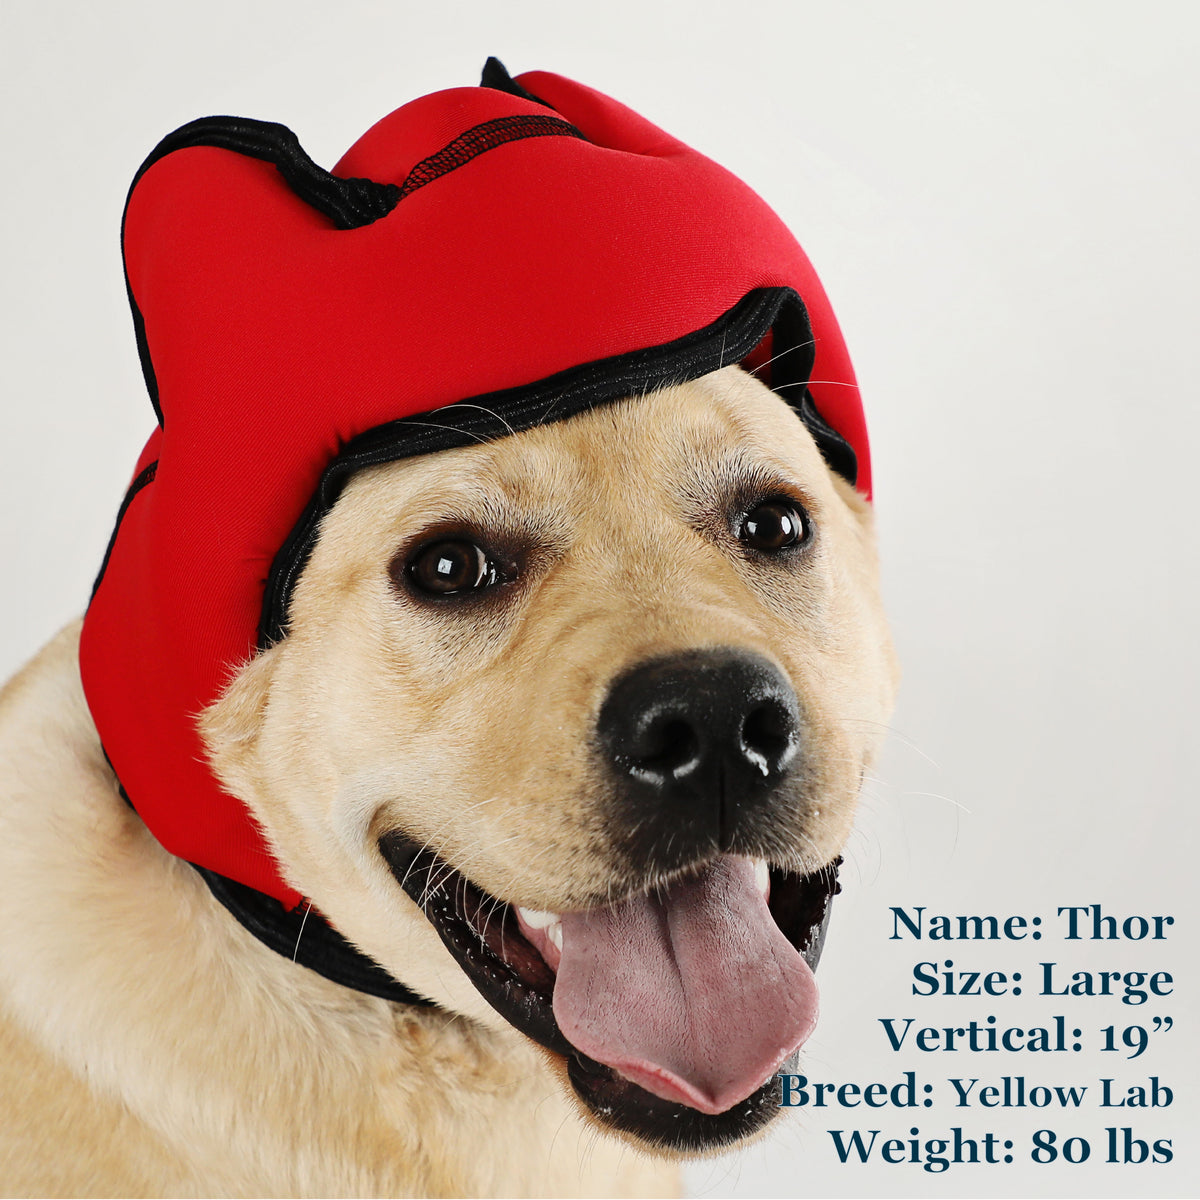 Thor is a Lab in a Large Red PAWNIX Noise Cancelling Headset for dogs